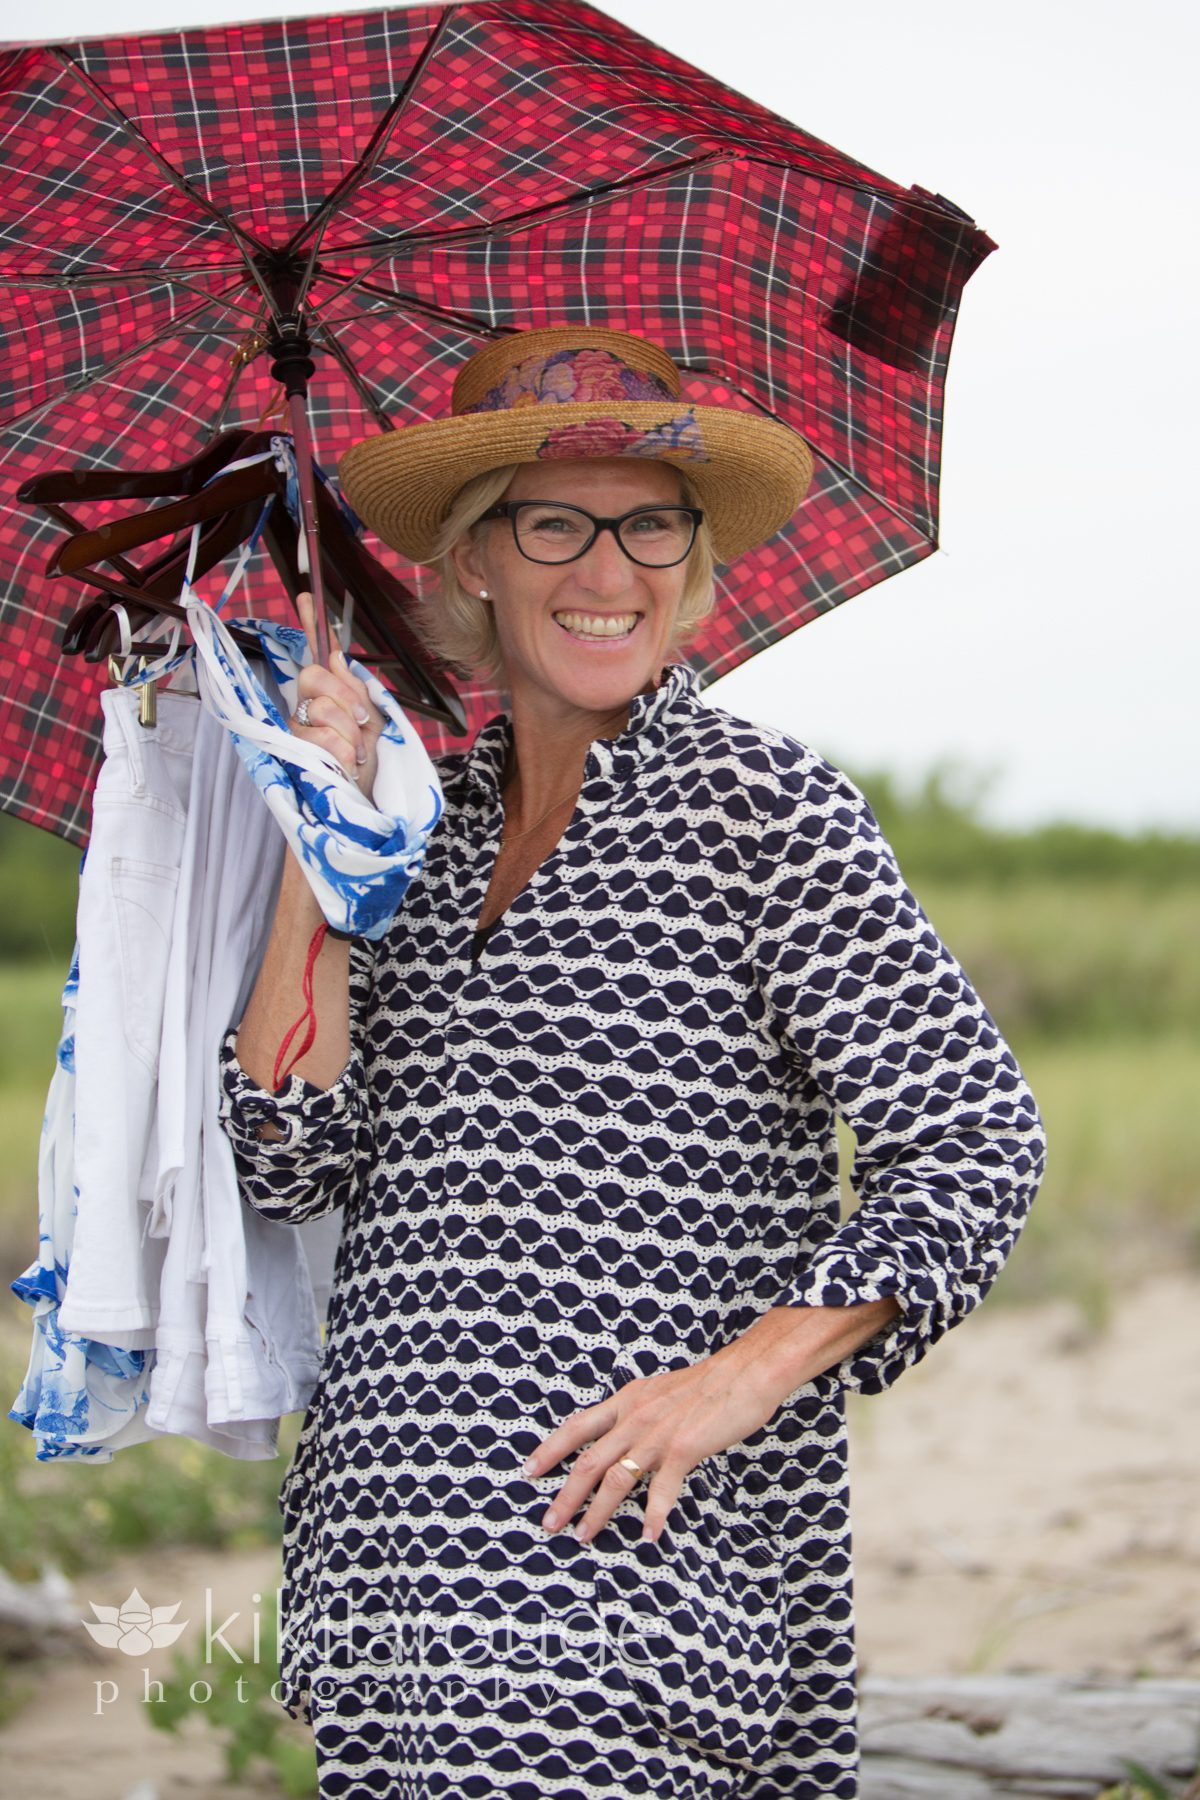 Mom on Senior photo with umbrella and outfits